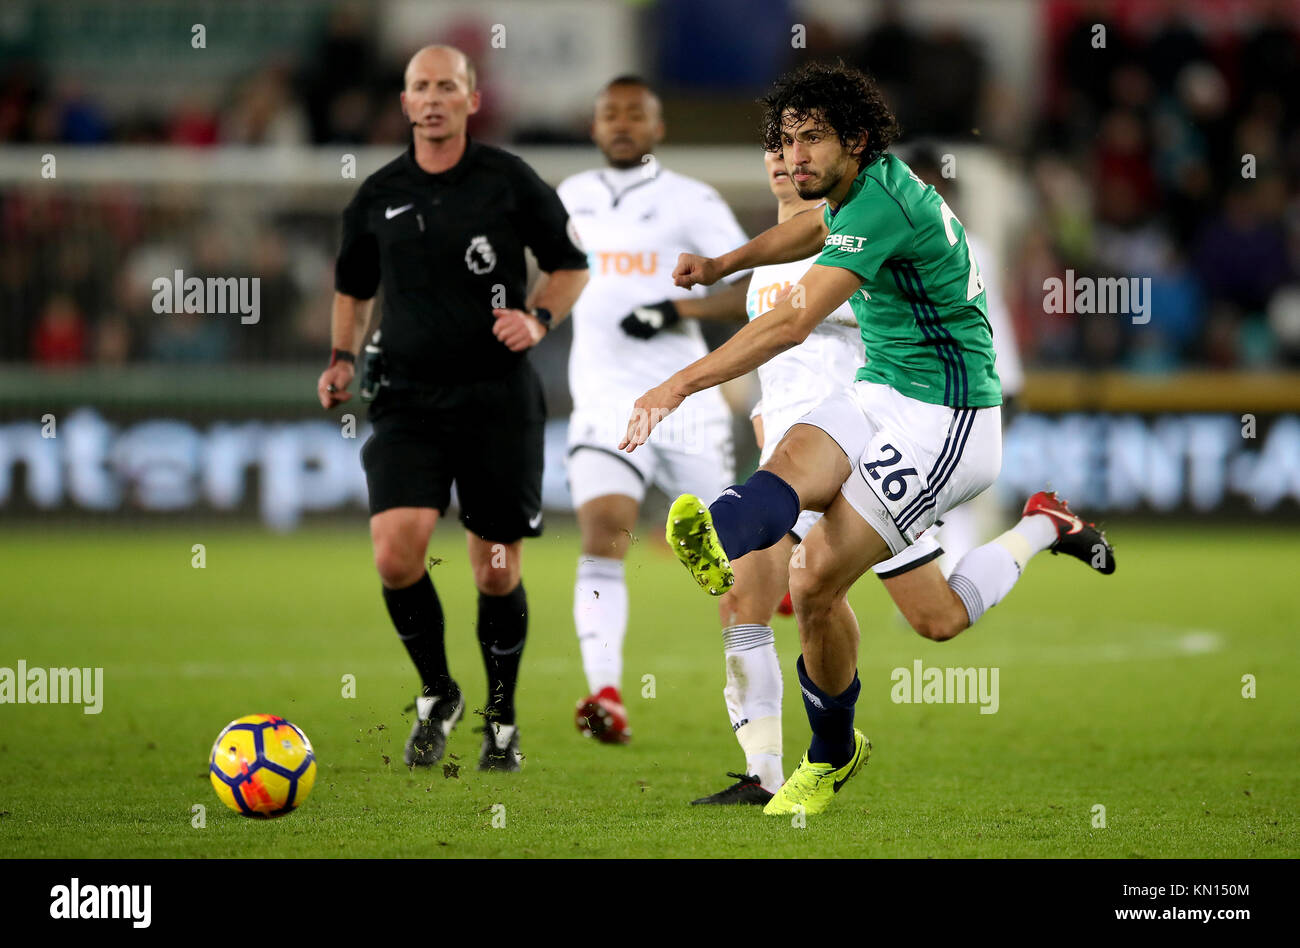 West Bromwich Albion's Ahmed Hegazy in action during the Premier League match at the Liberty Stadium, Swansea. Stock Photo